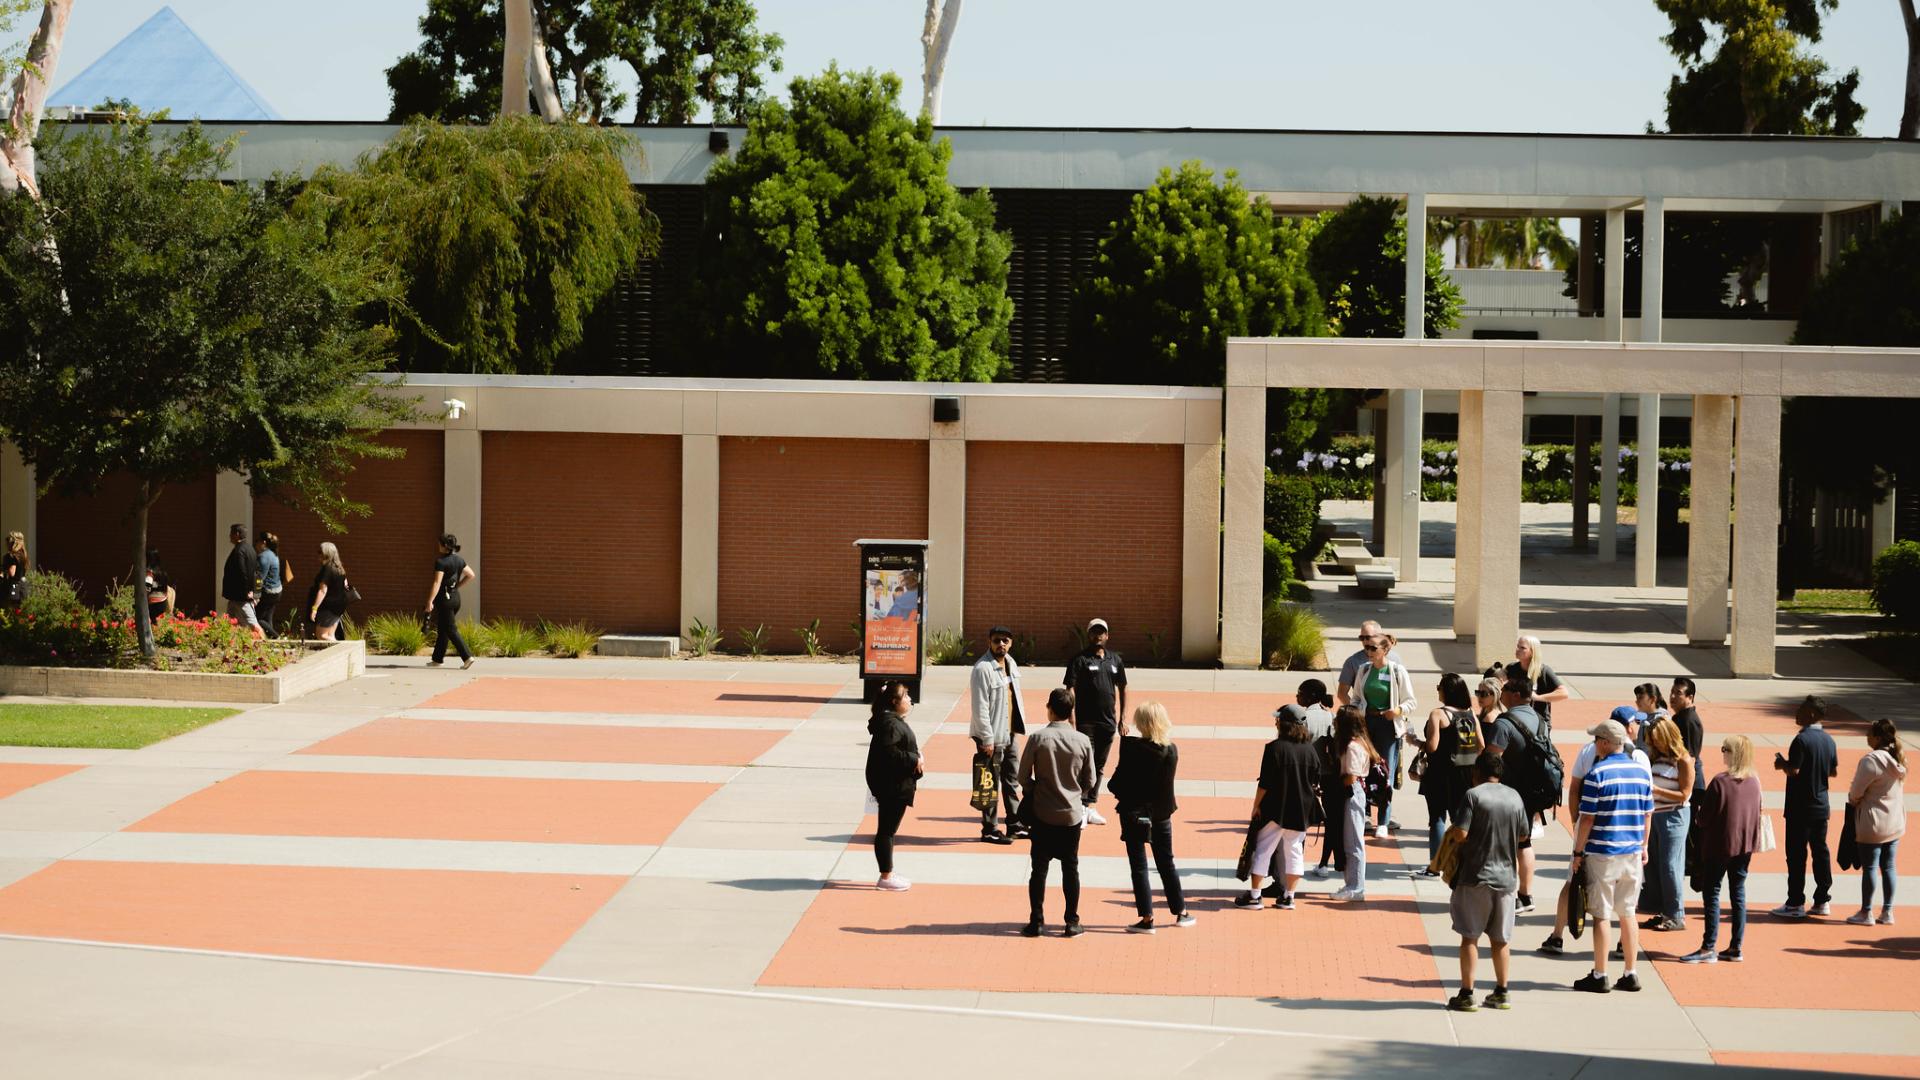 A group of people gathered in an outdoor courtyard, with some individuals walking in the background near a modern building with red brick and concrete columns.